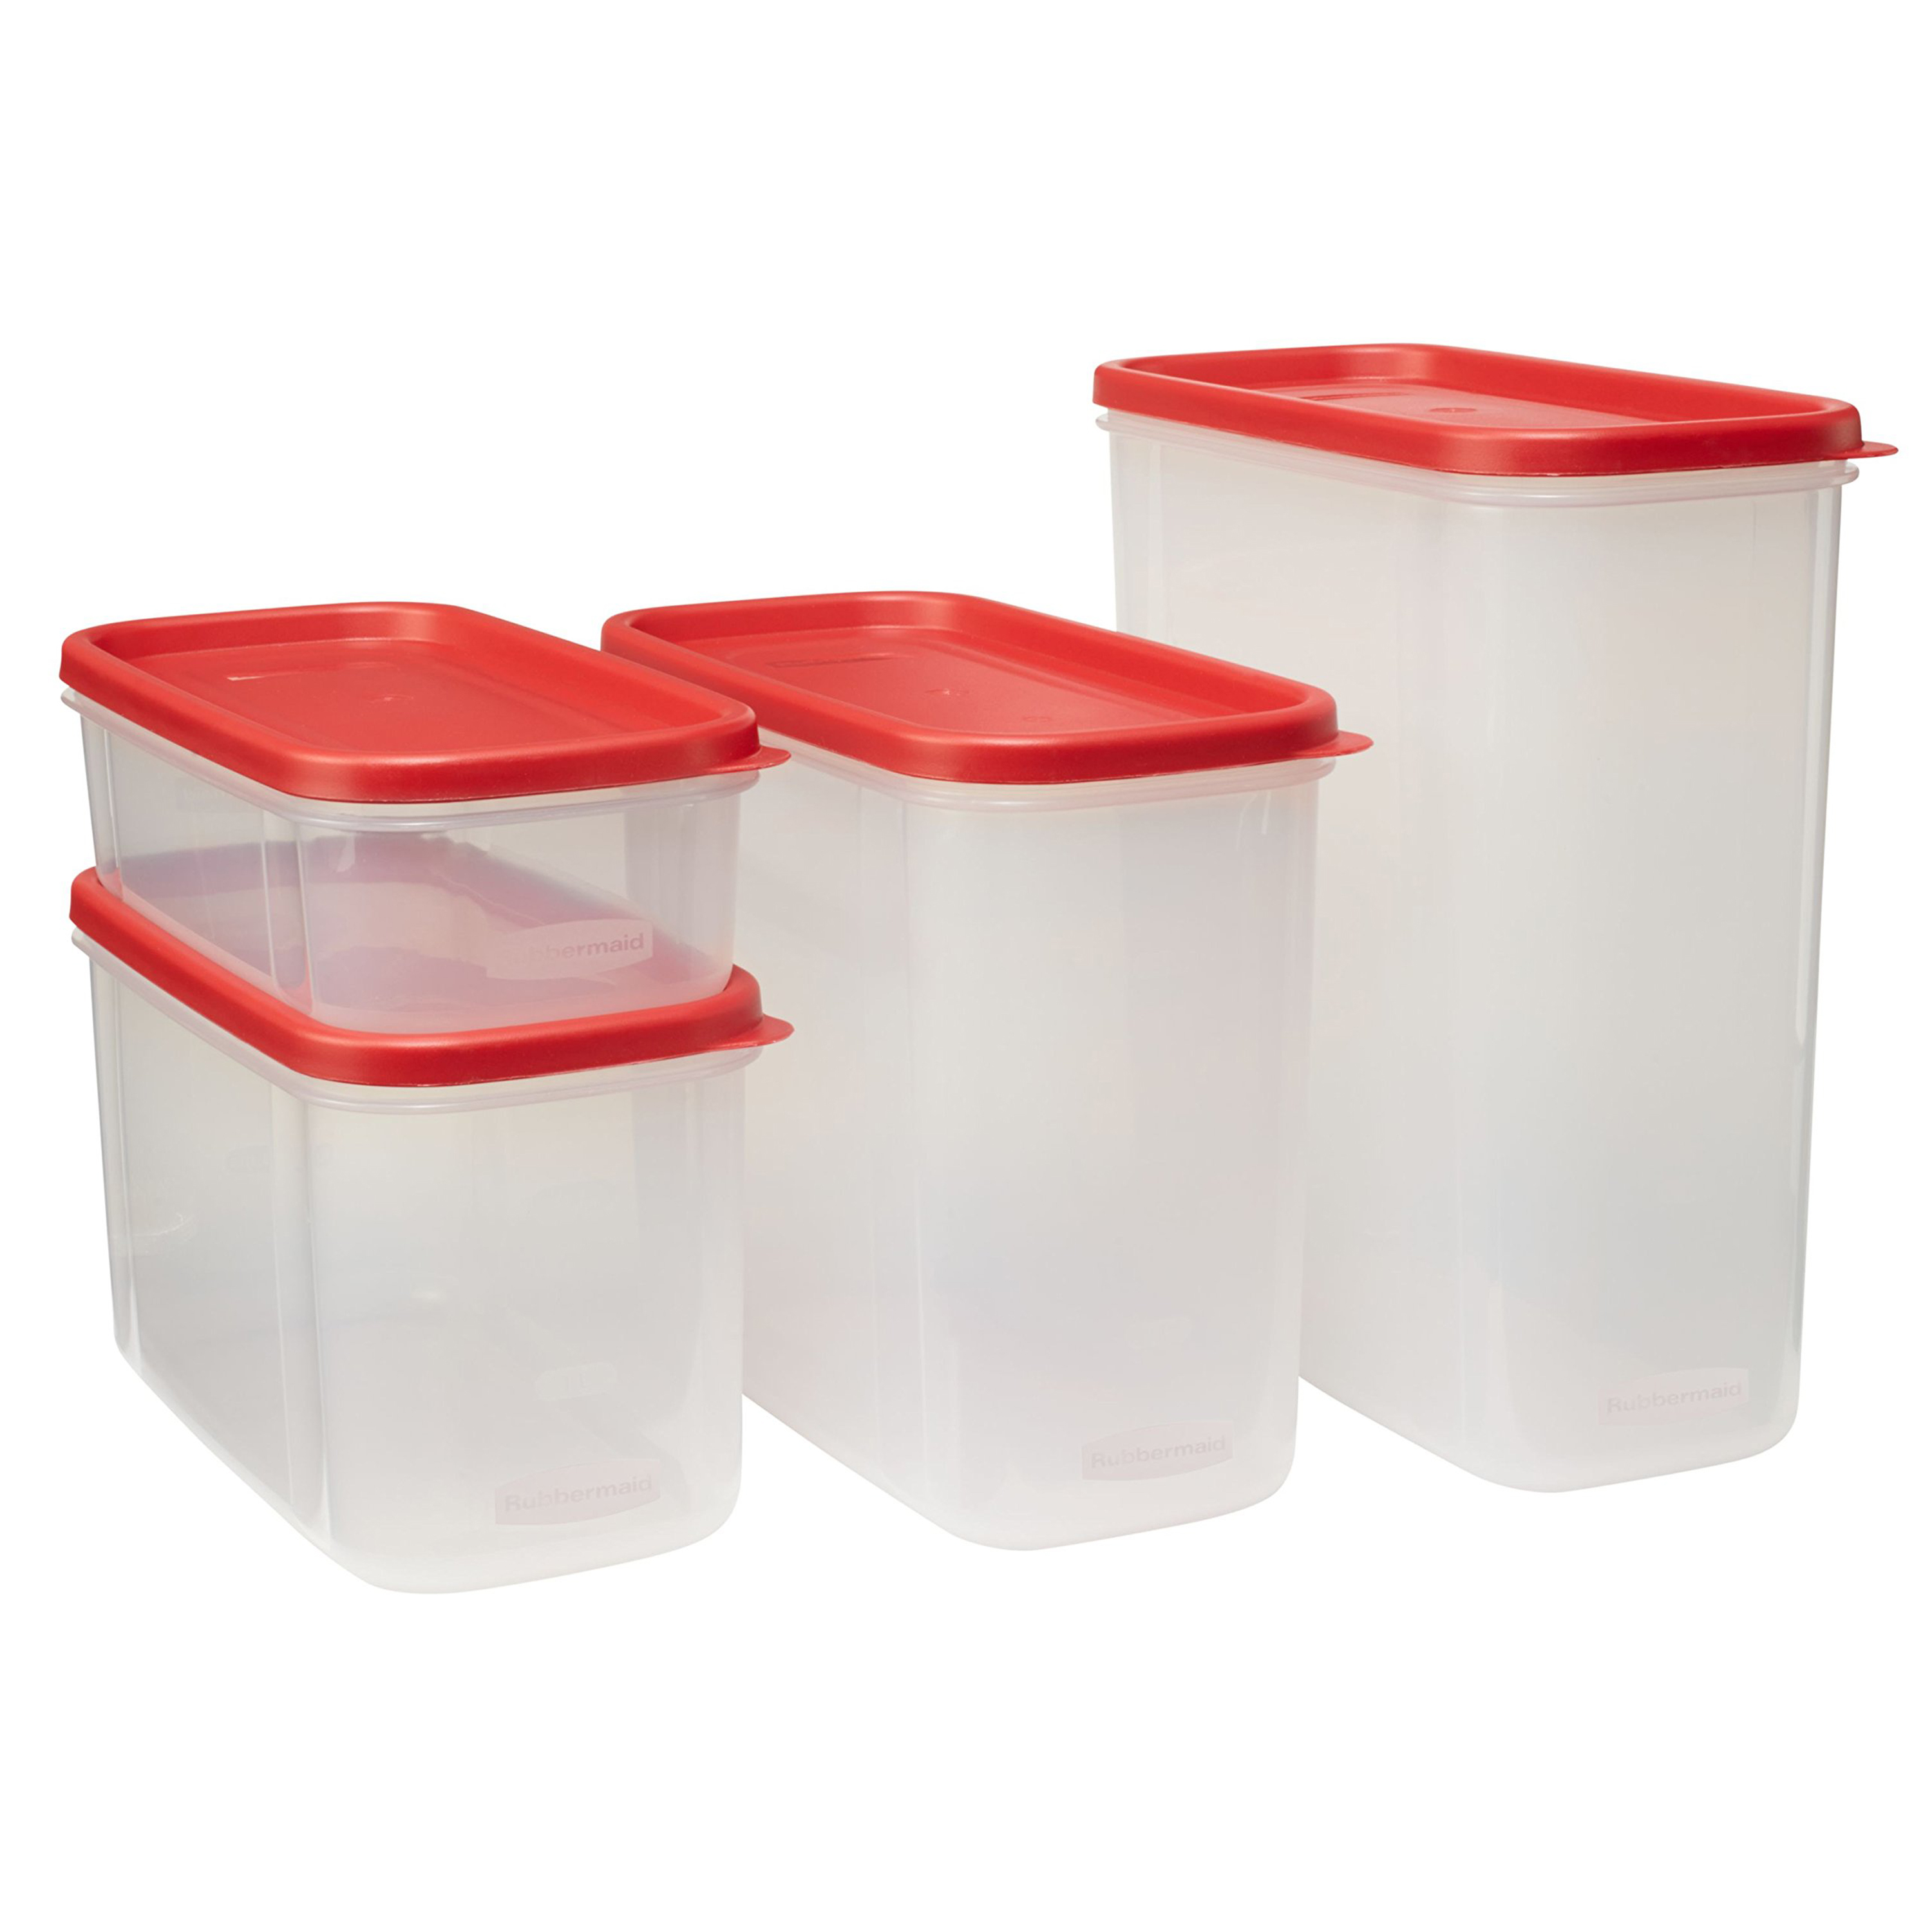 Rubbermaid Modular Pantry Canister Set, 8pcs - image 5 of 12